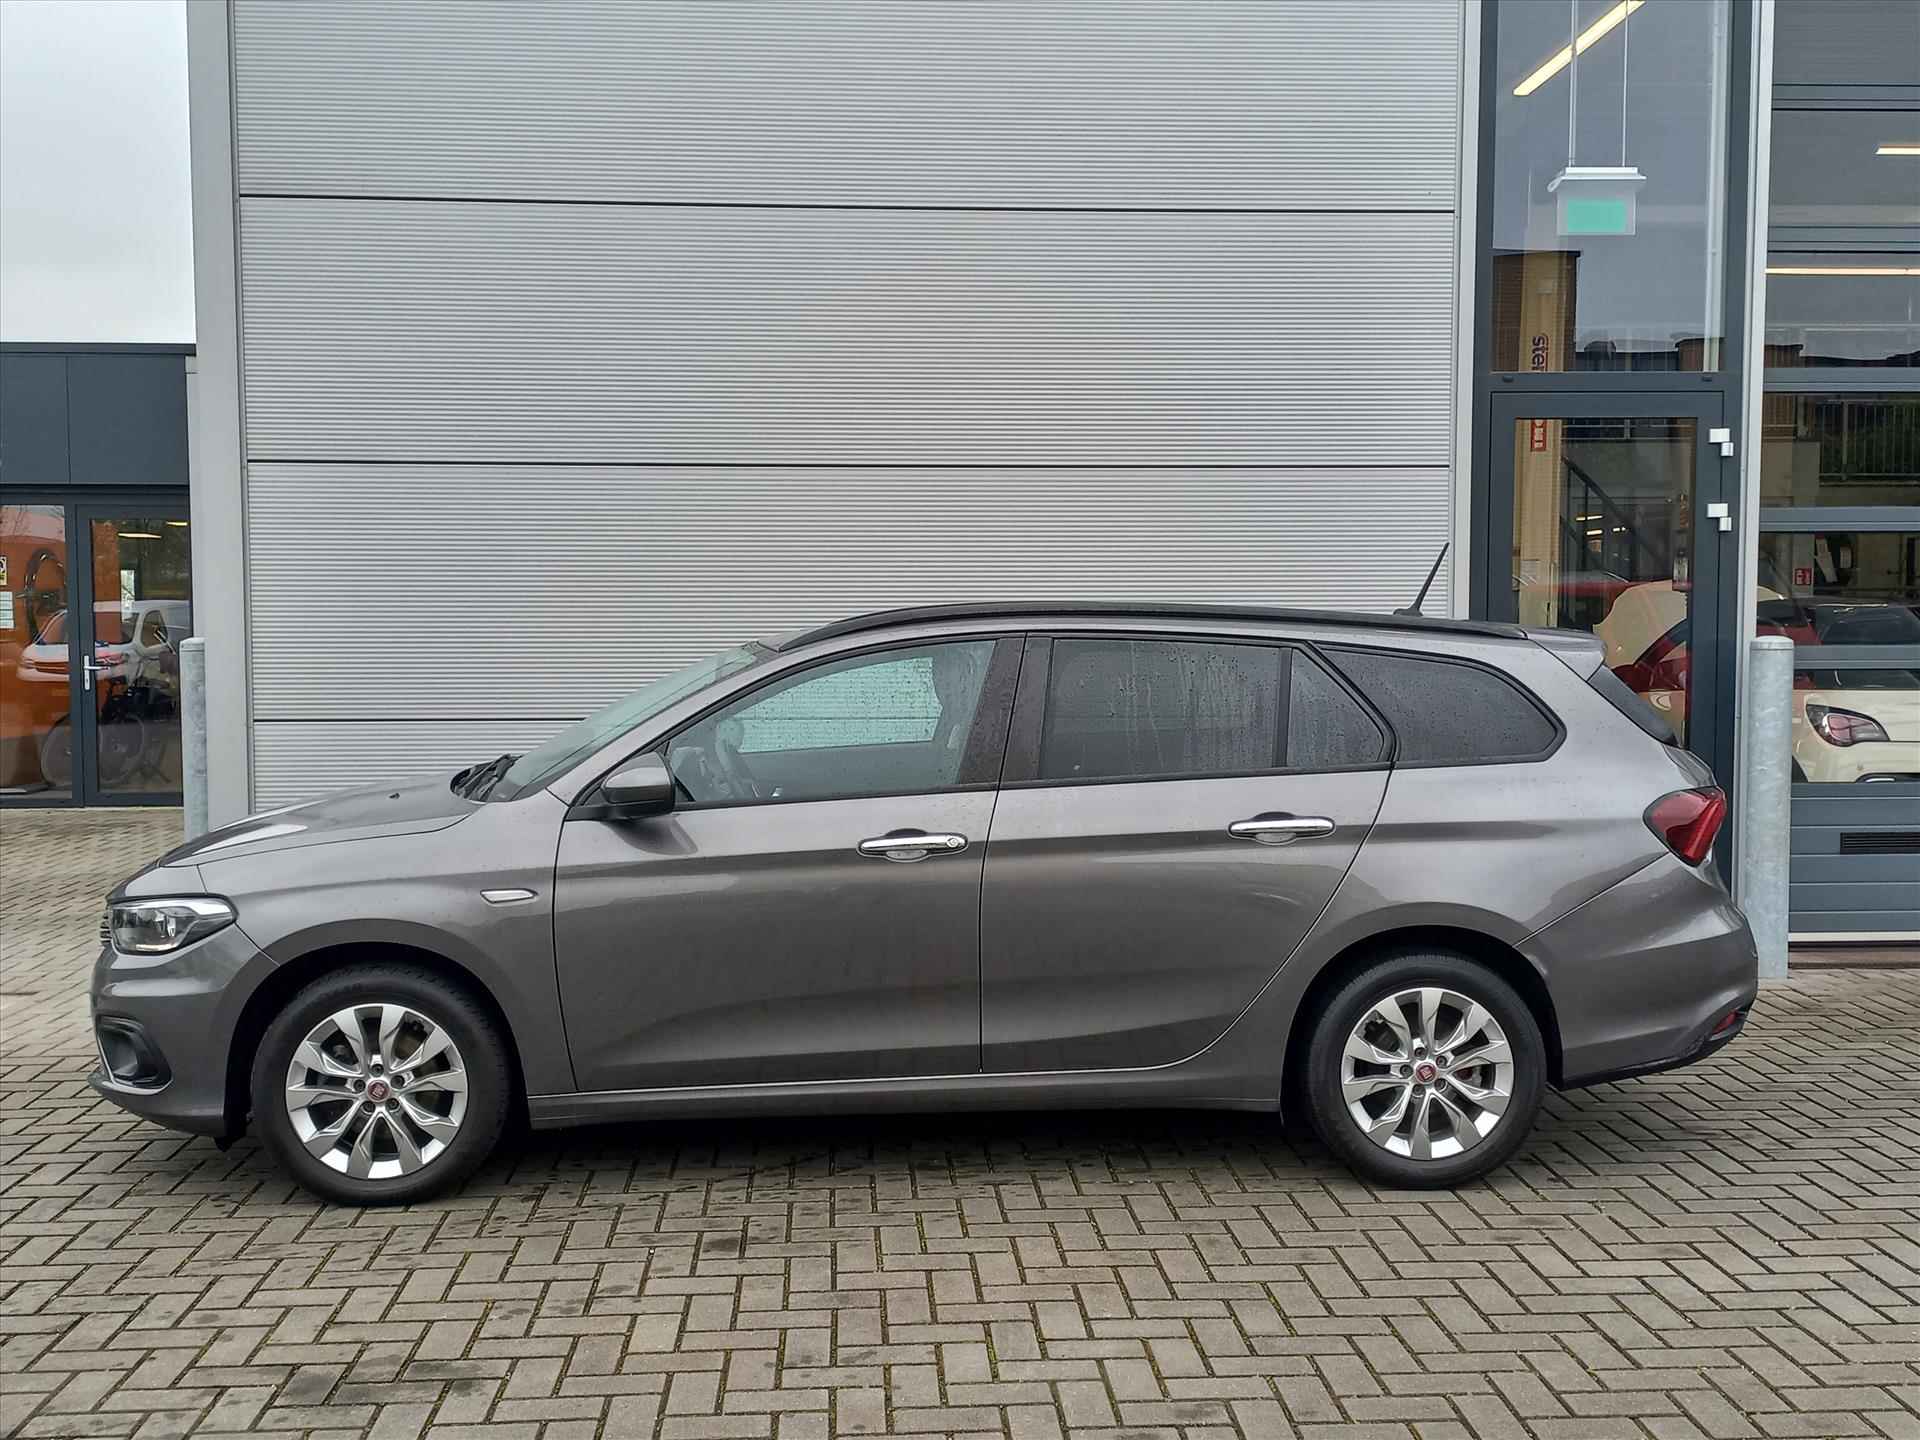 Fiat Tipo Stationwagon 1.4T 120pk BUSINESS | Airconditioning | Navigatie | Cruise control | Lm velgen - 3/40